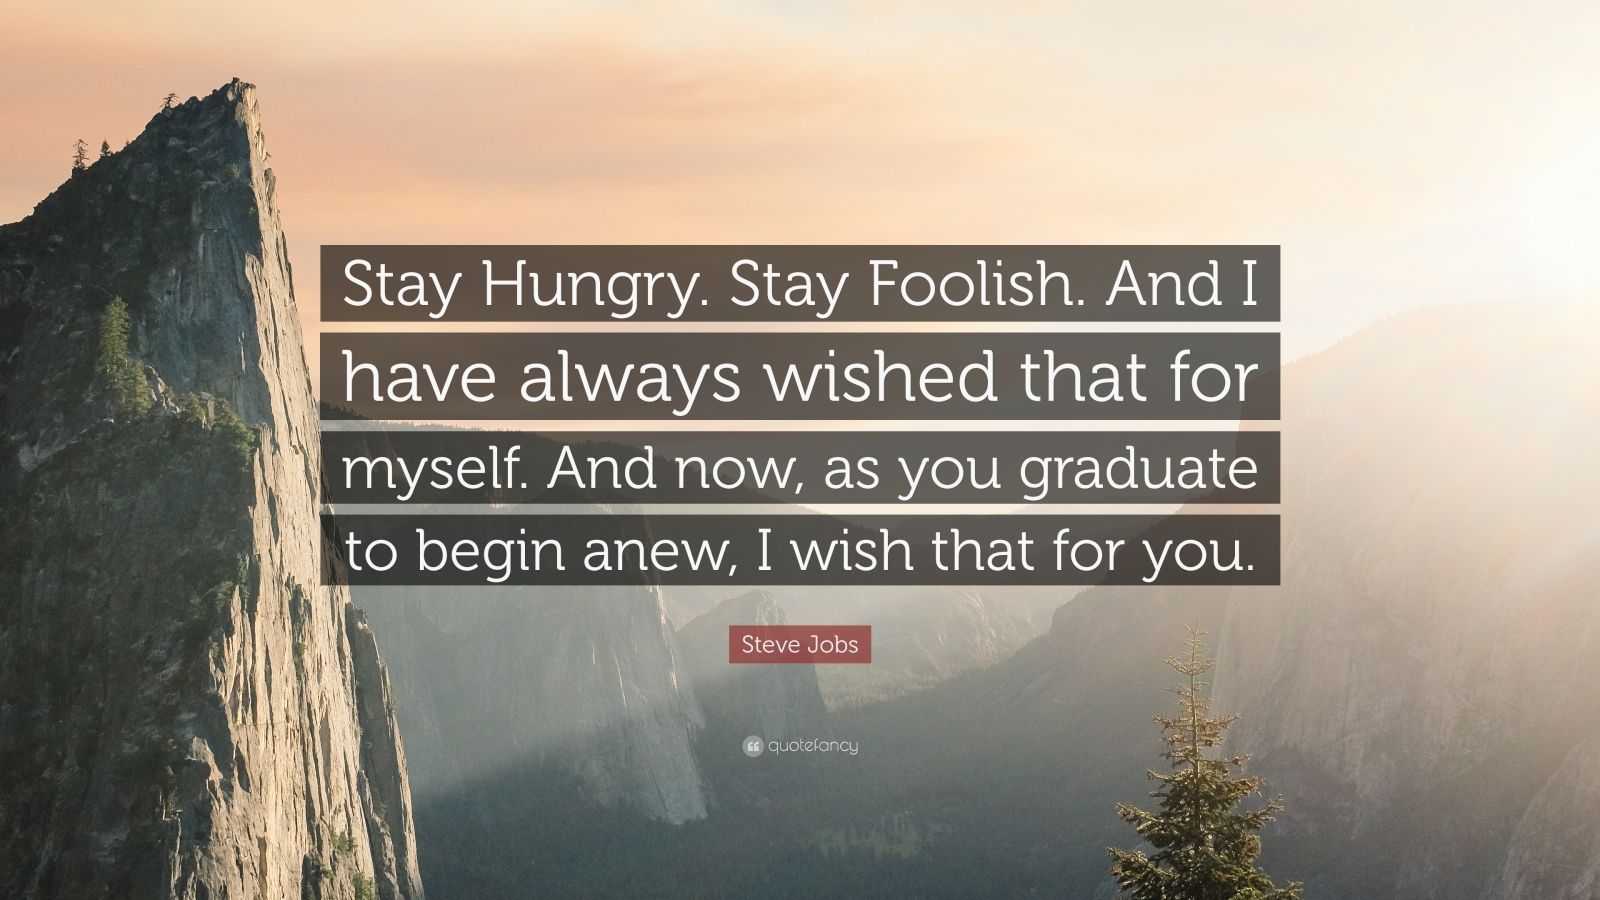 steve jobs quote: "stay hungry. stay foolish.